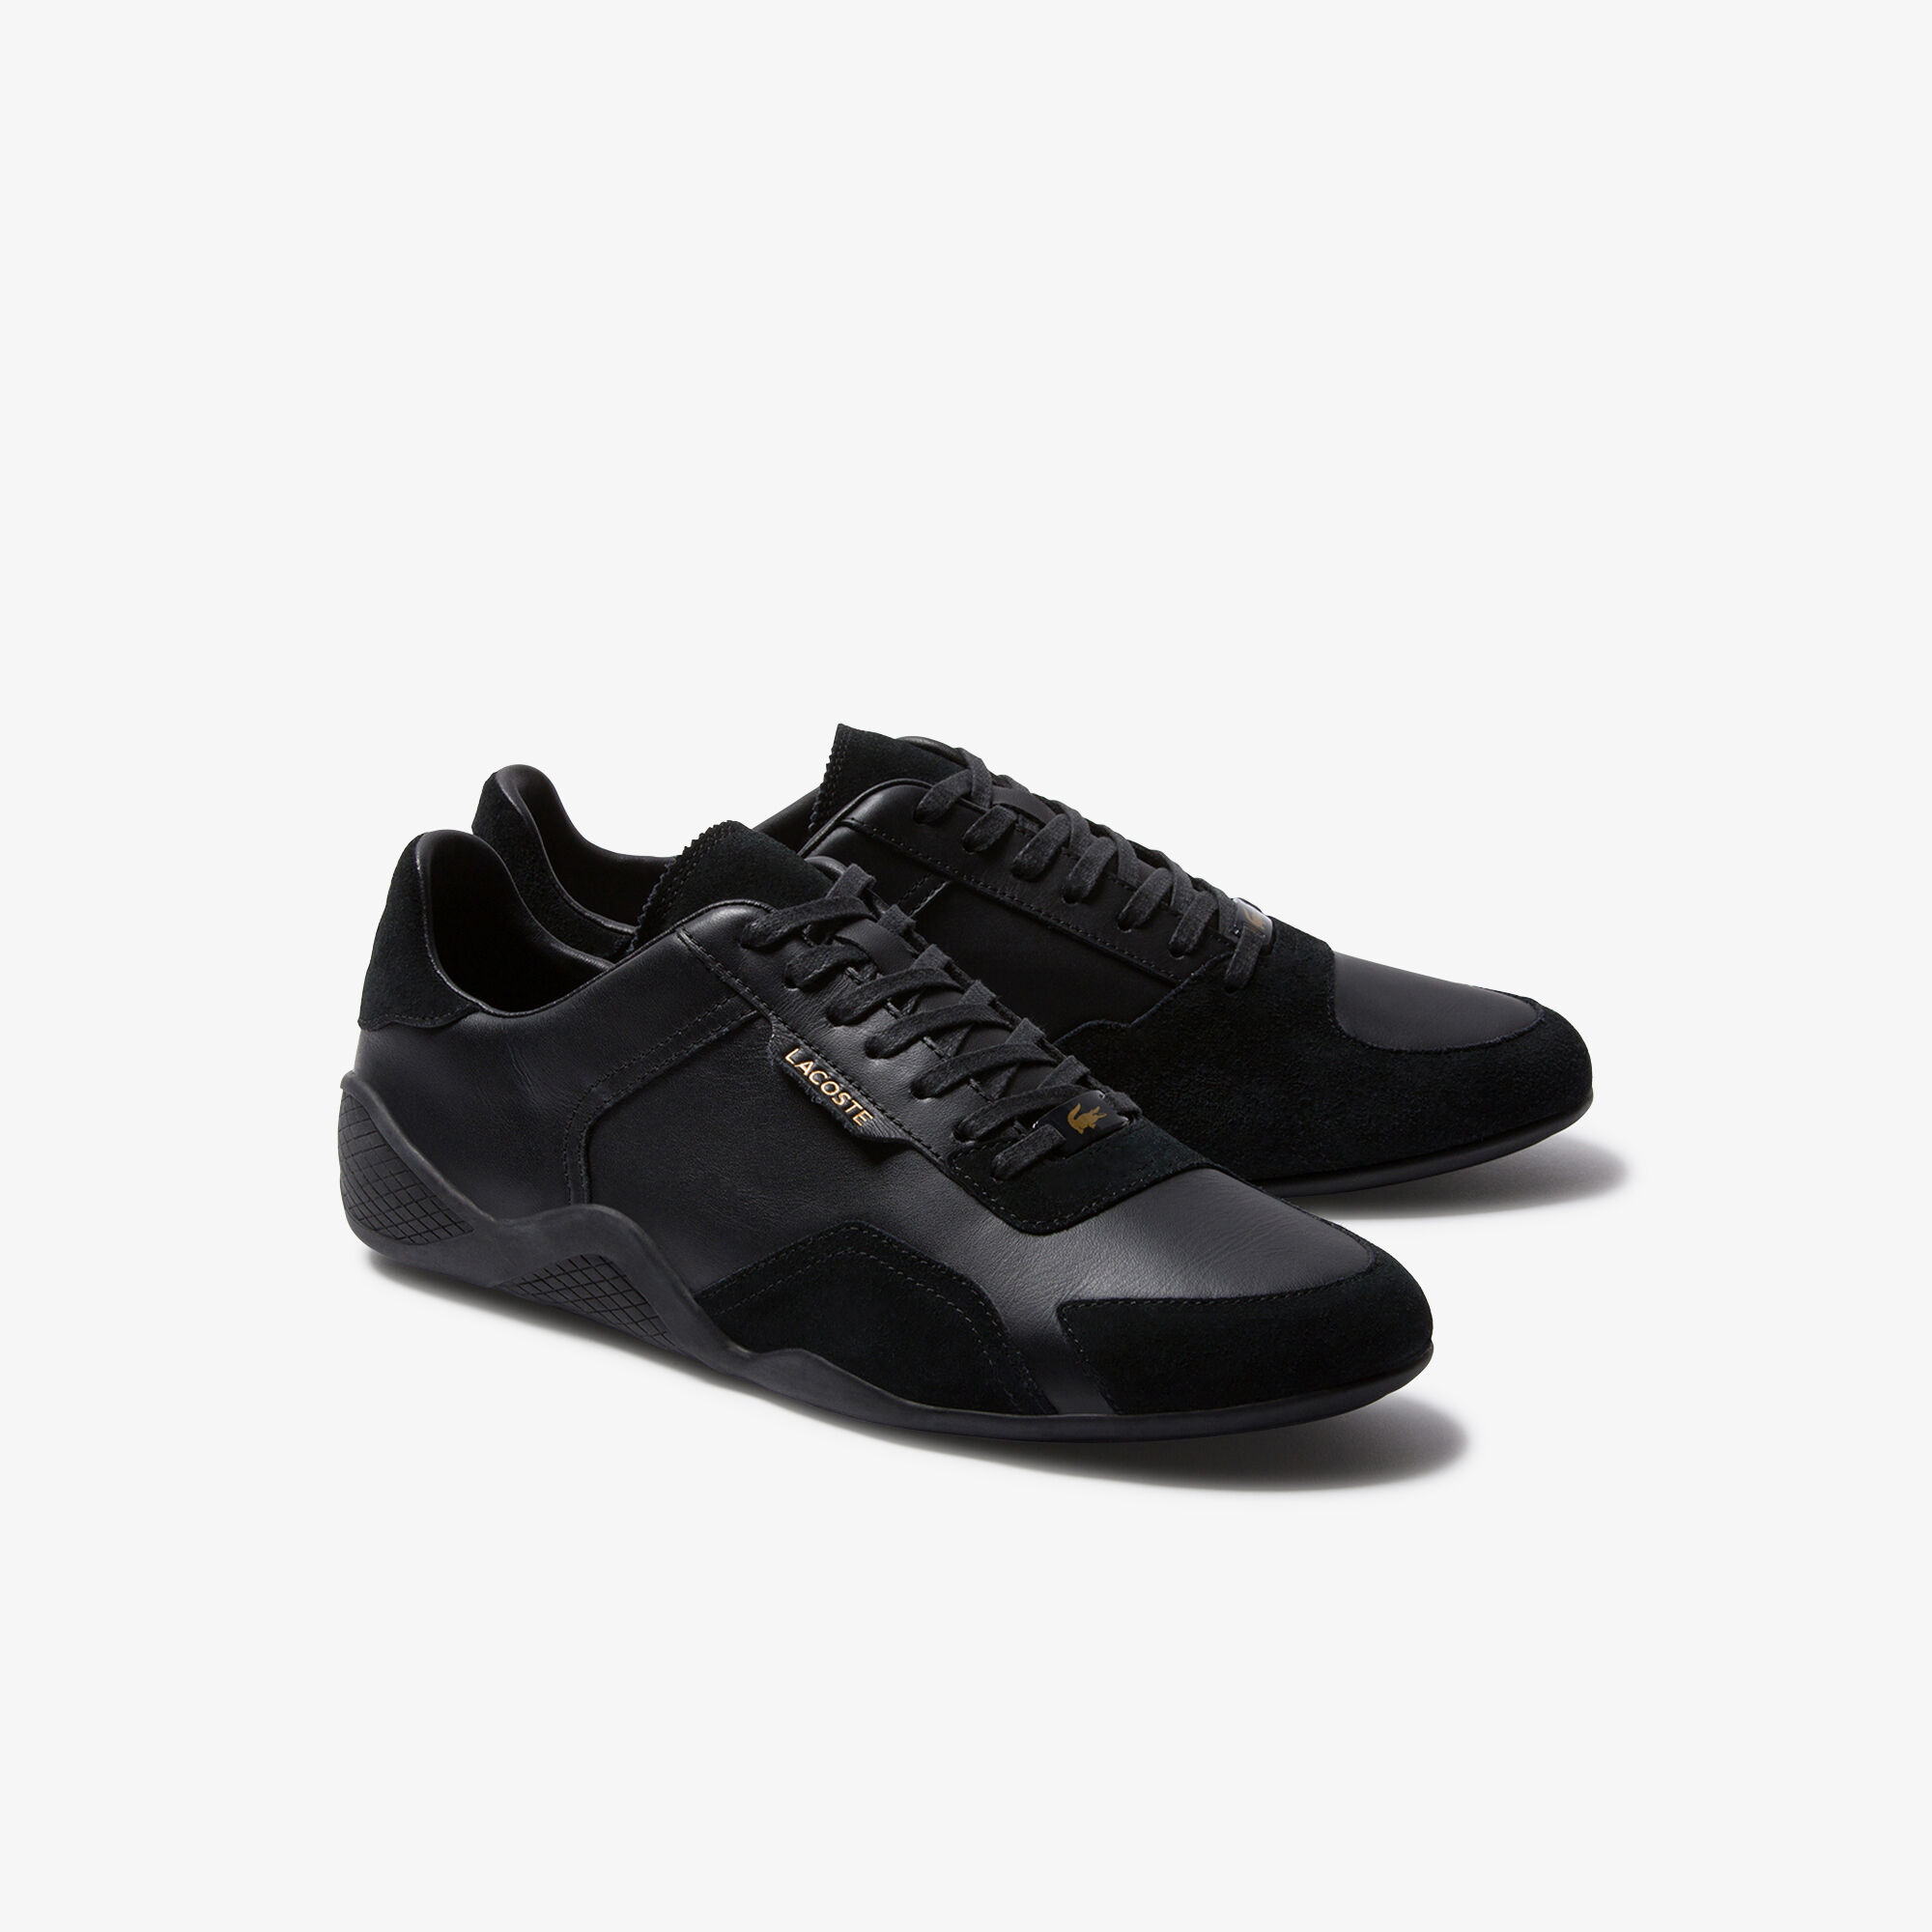 Men's Hapona Leather and Suede Sneakers